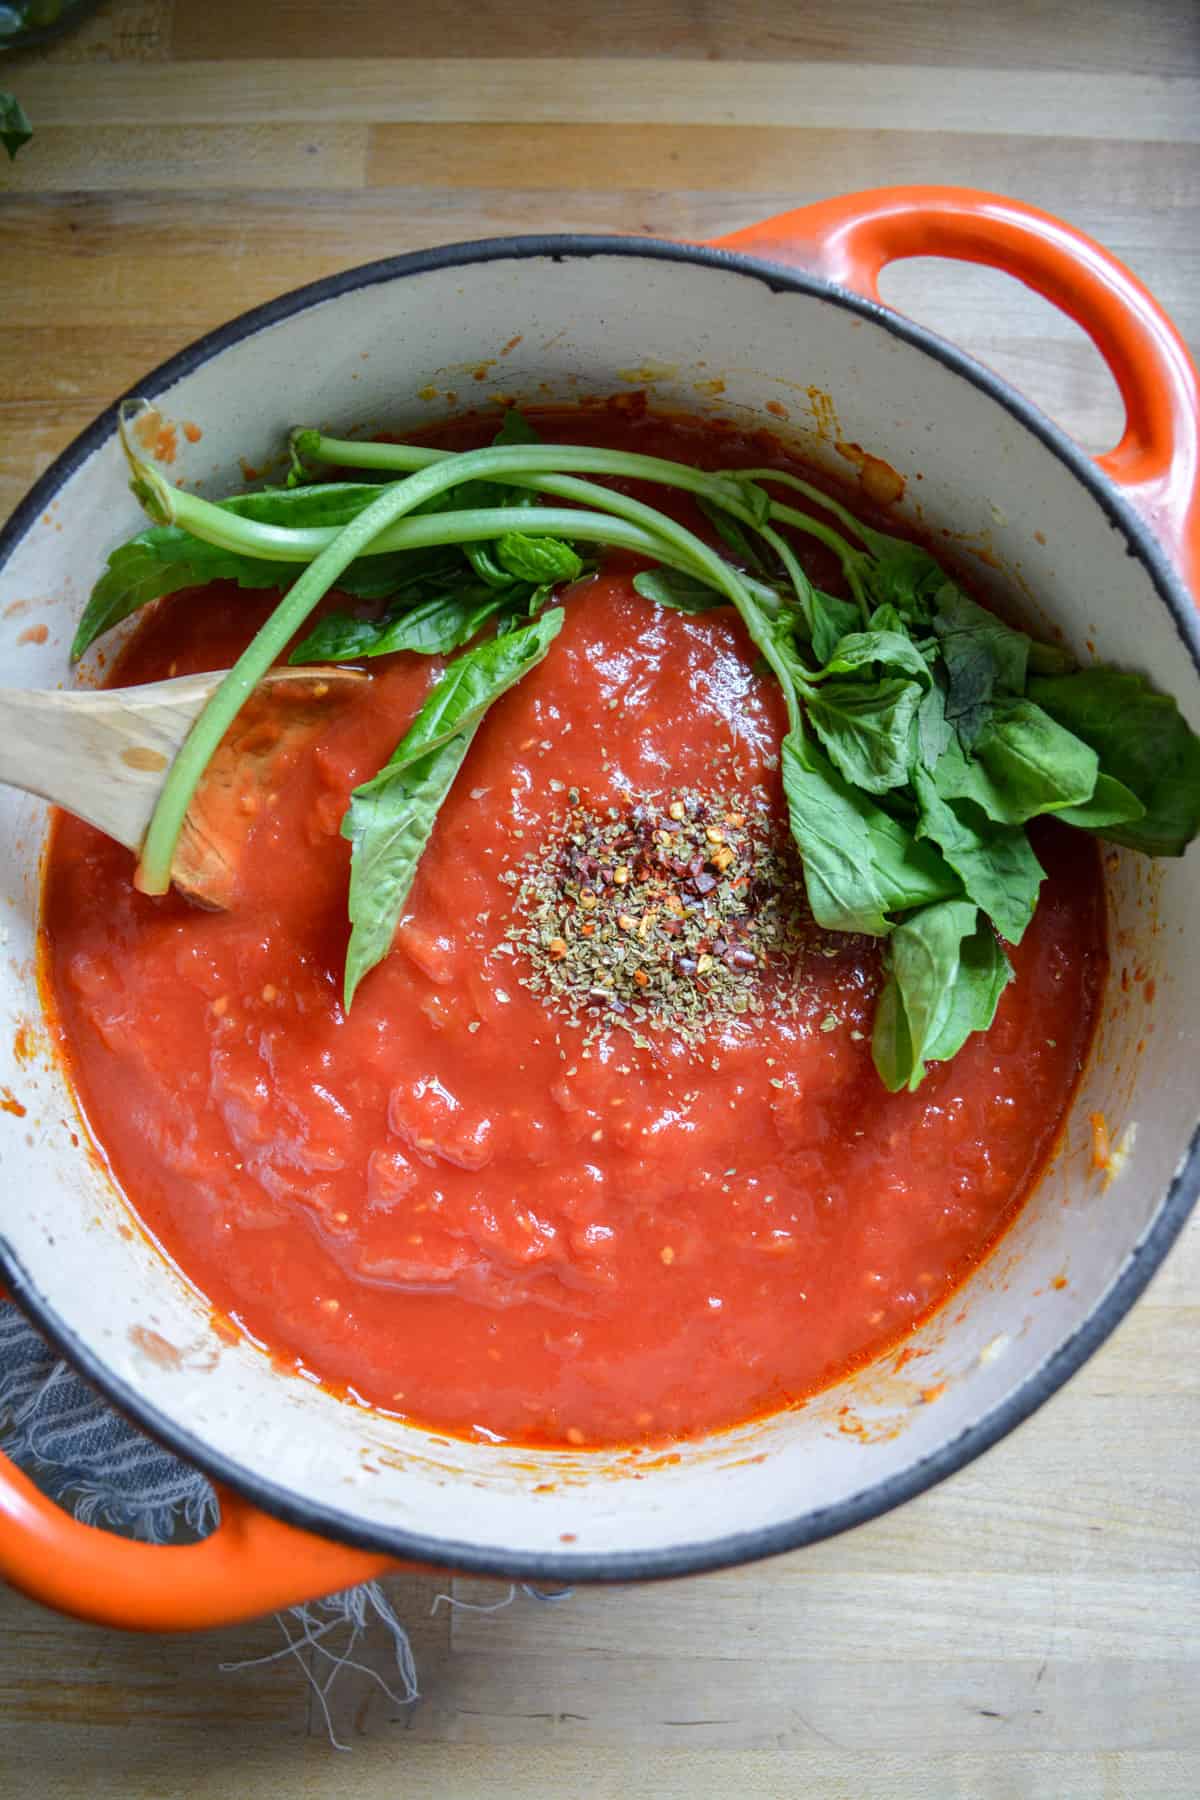 Tomatoes added into the the dutch oven topped with herbs and basil sprigs.